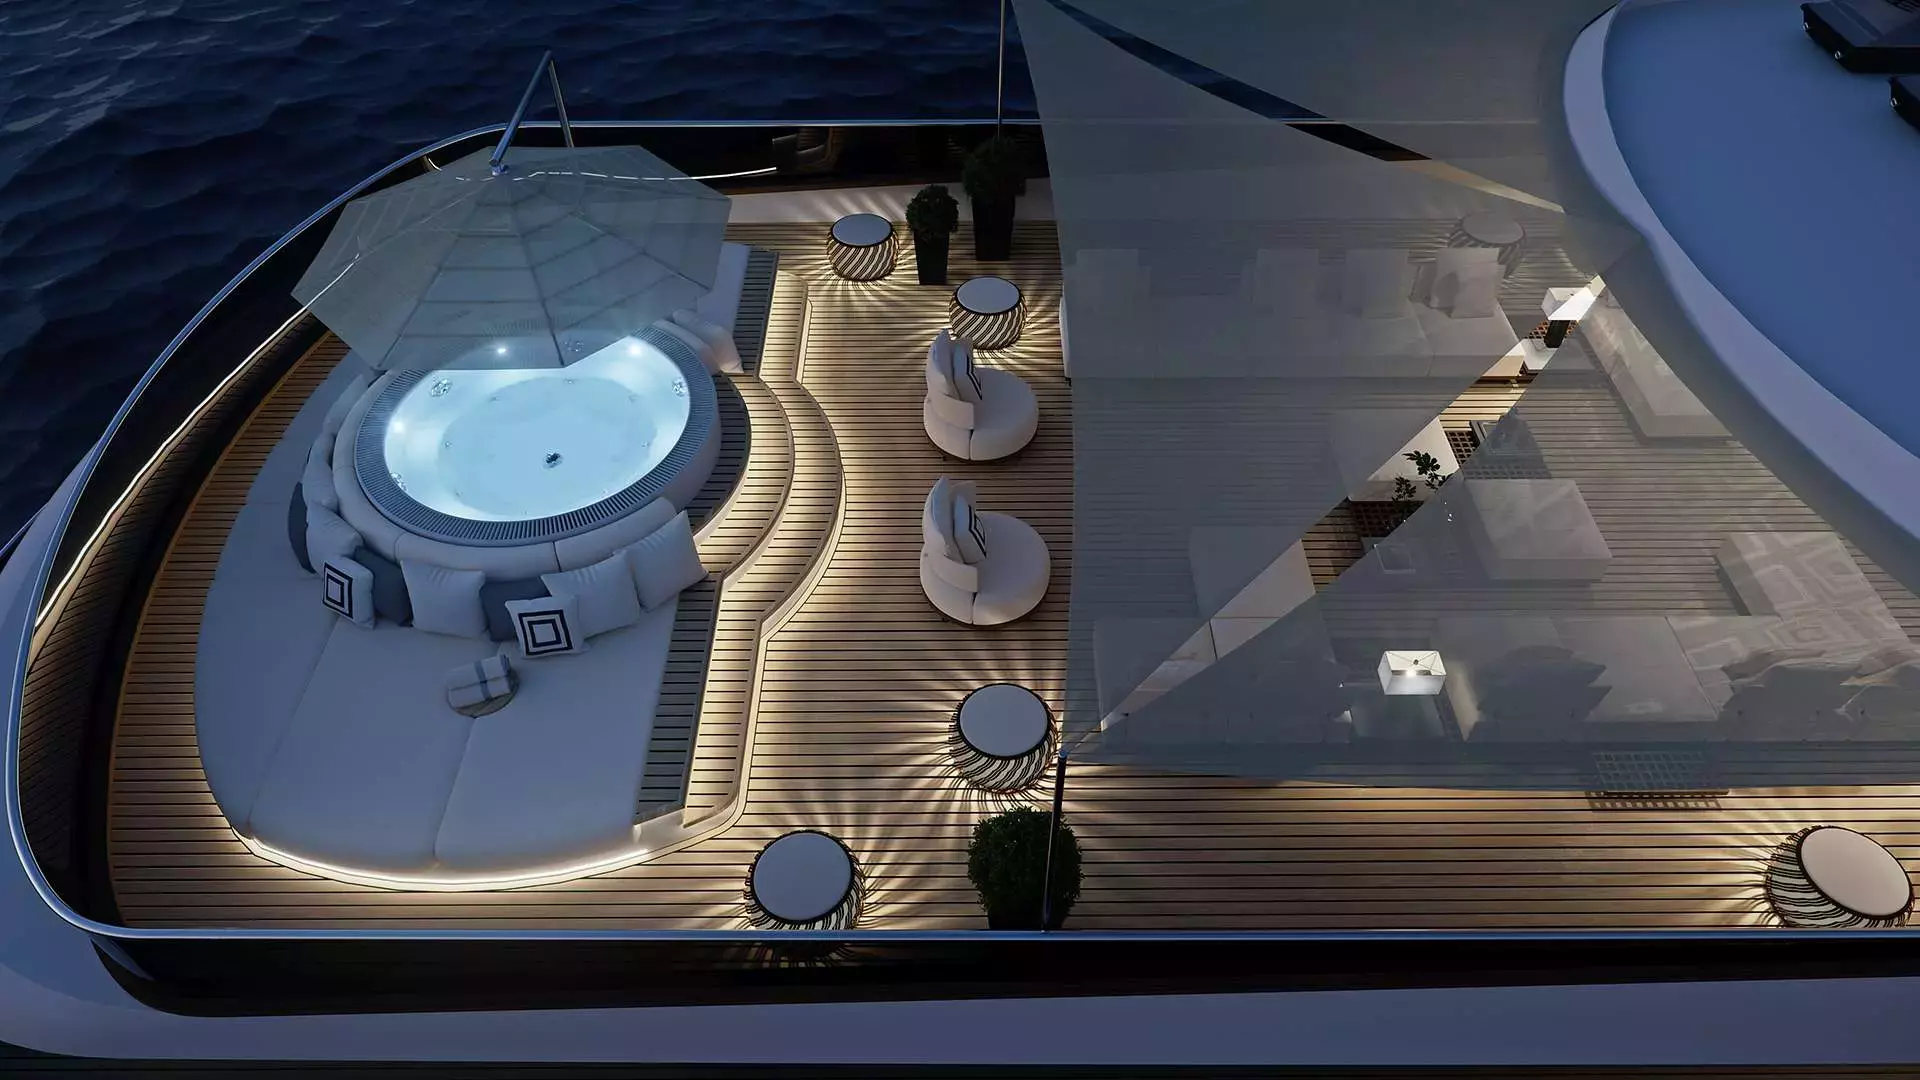 Black Swan by Custom Made - Top rates for a Charter of a private Superyacht in Croatia